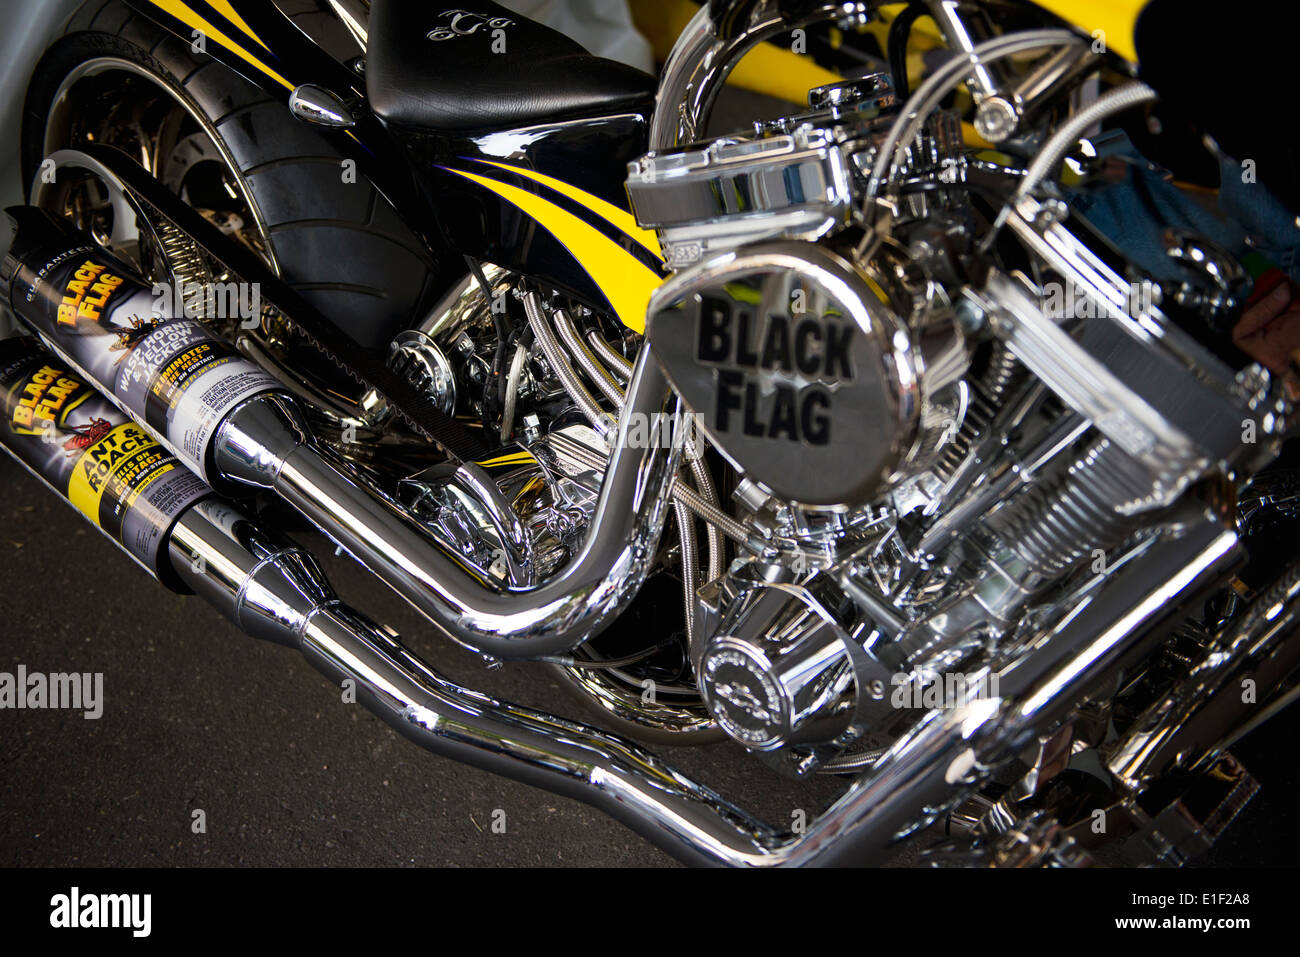 'Black Flag' Custom Built Motorcycle from 'Orange County Choppers' on display at the 2014 Coca-Cola 600 Nascar Race. Stock Photo